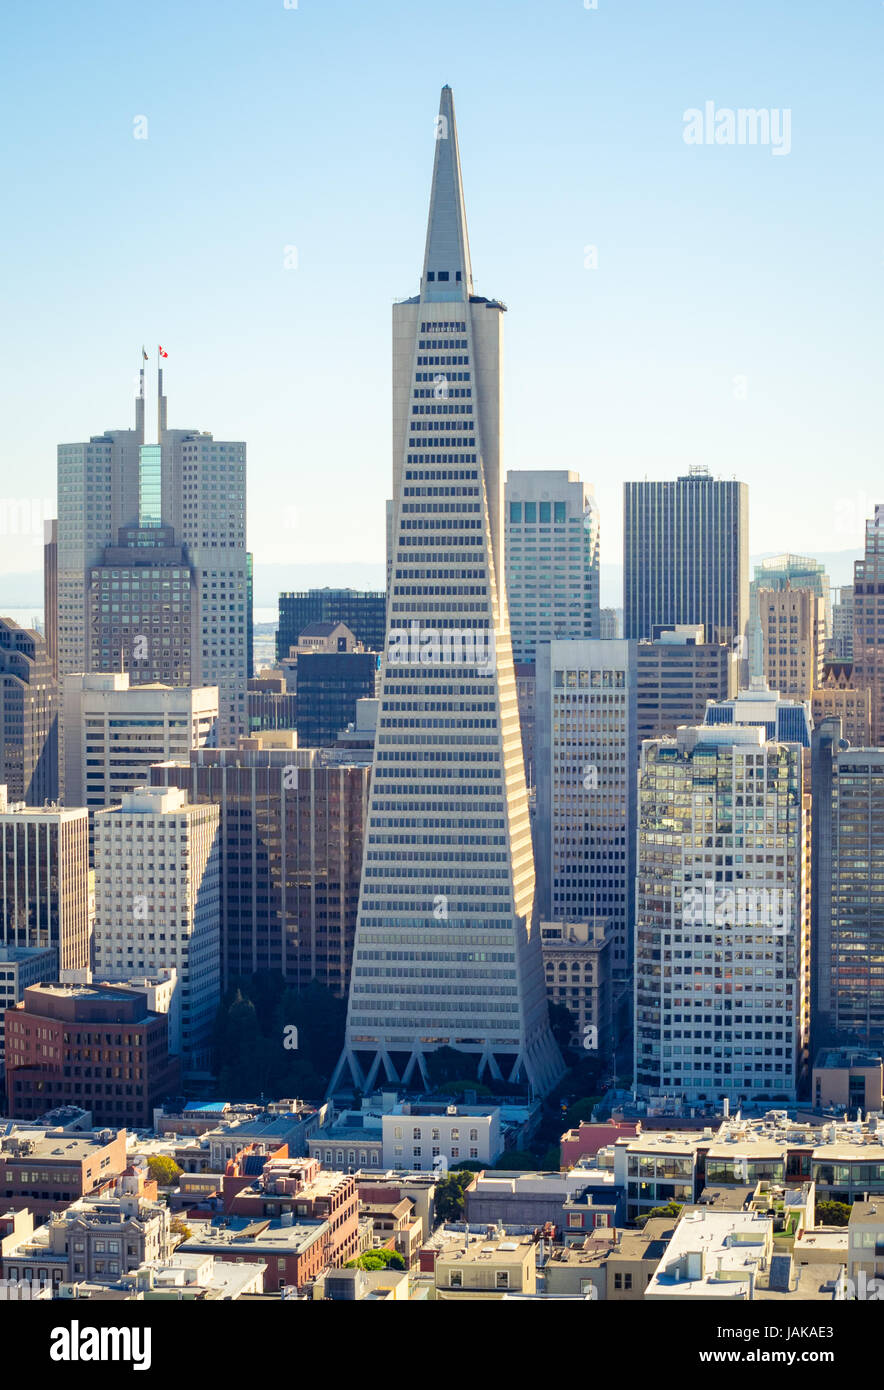 An aerial view of the Transamerica Pyramid and the Financial District of San Francisco, California, as seen from atop Coit Tower on Telegraph Hill. Stock Photo